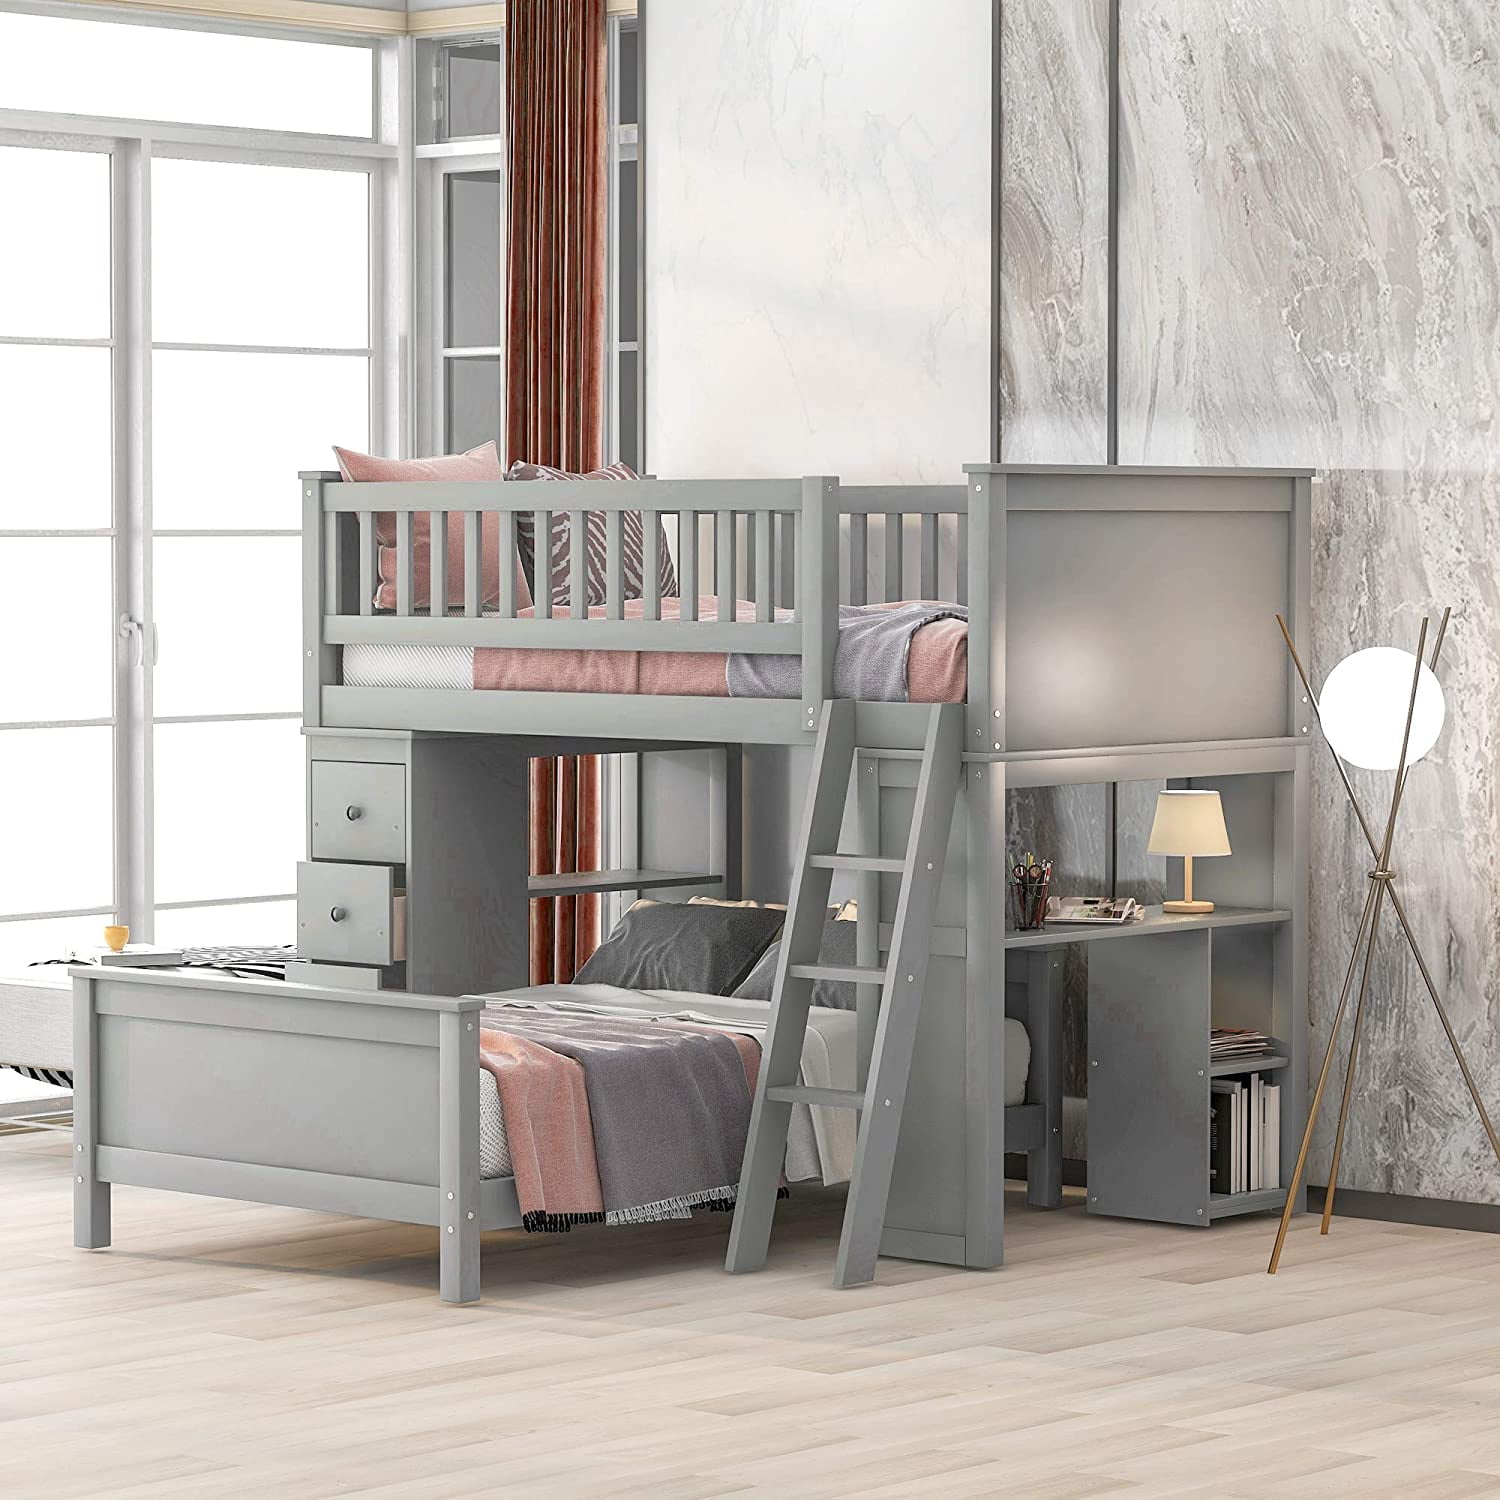 Bunk Bed Twin Over Loft, Bunk Beds And Loft